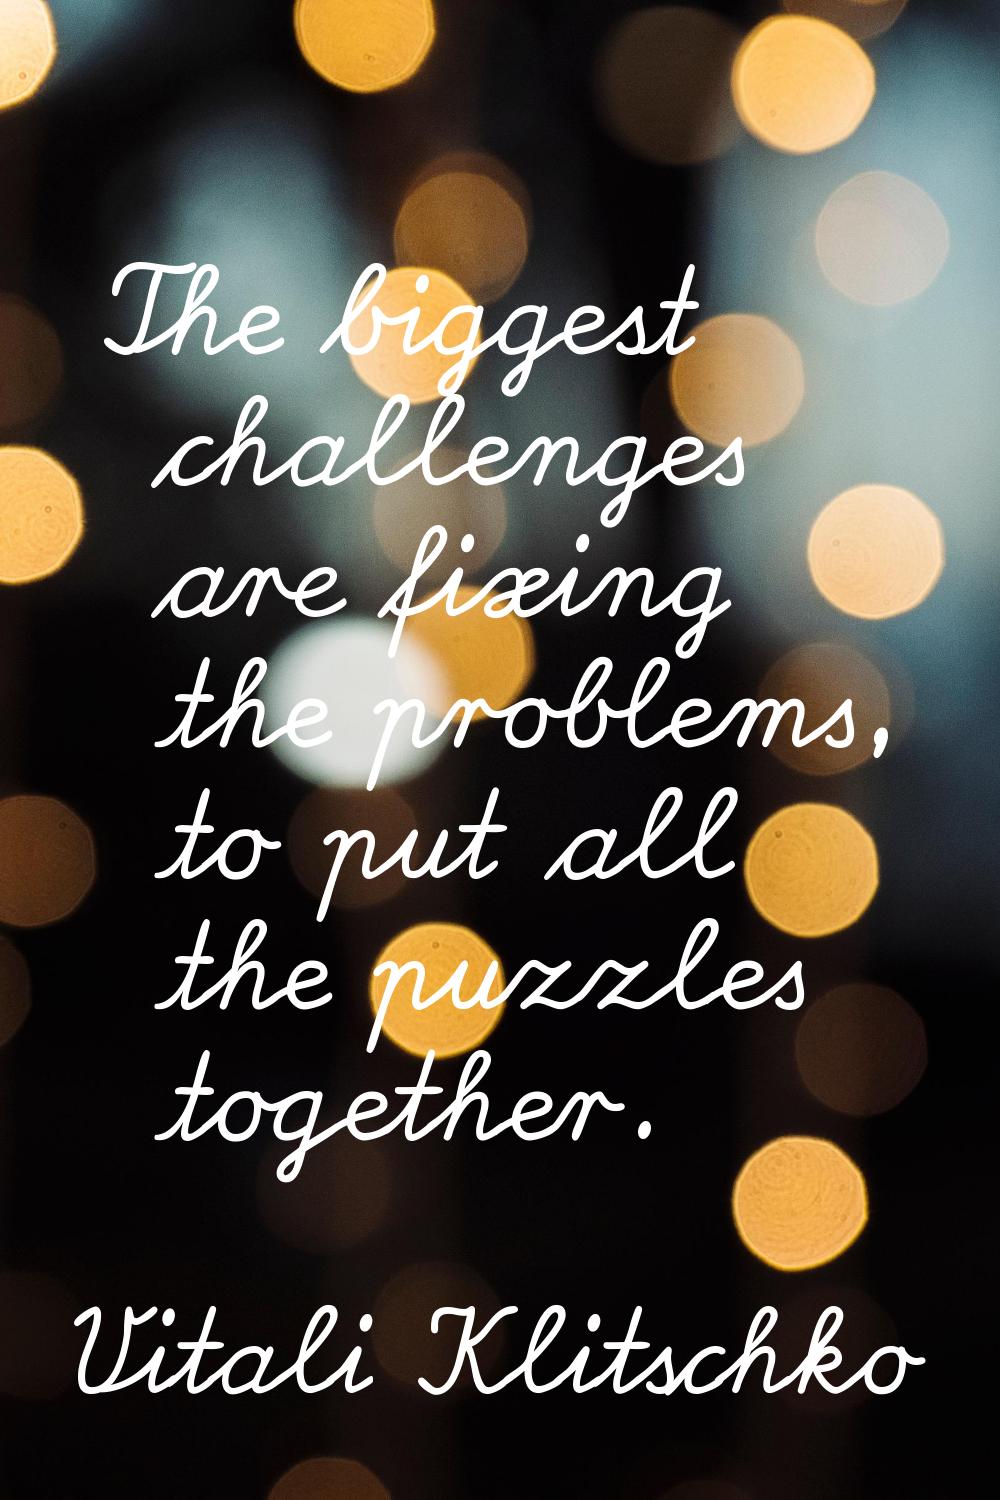 The biggest challenges are fixing the problems, to put all the puzzles together.